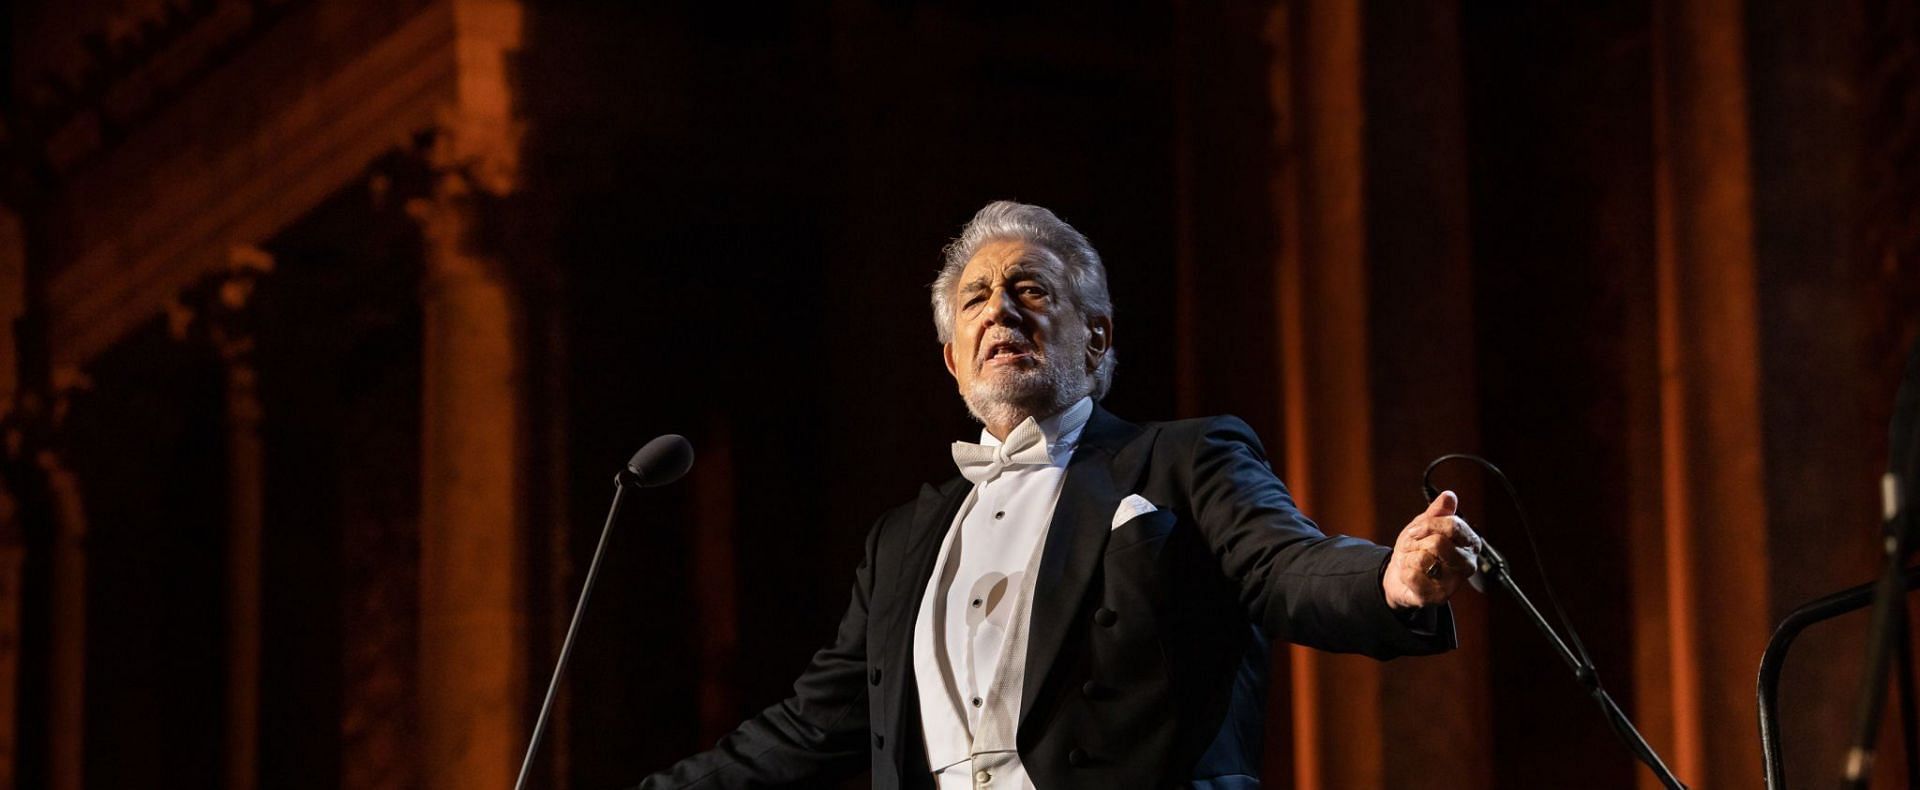 Placido Domingo is considered to be one of the most celebrated Opera singers in the world (Image via Getty Images)